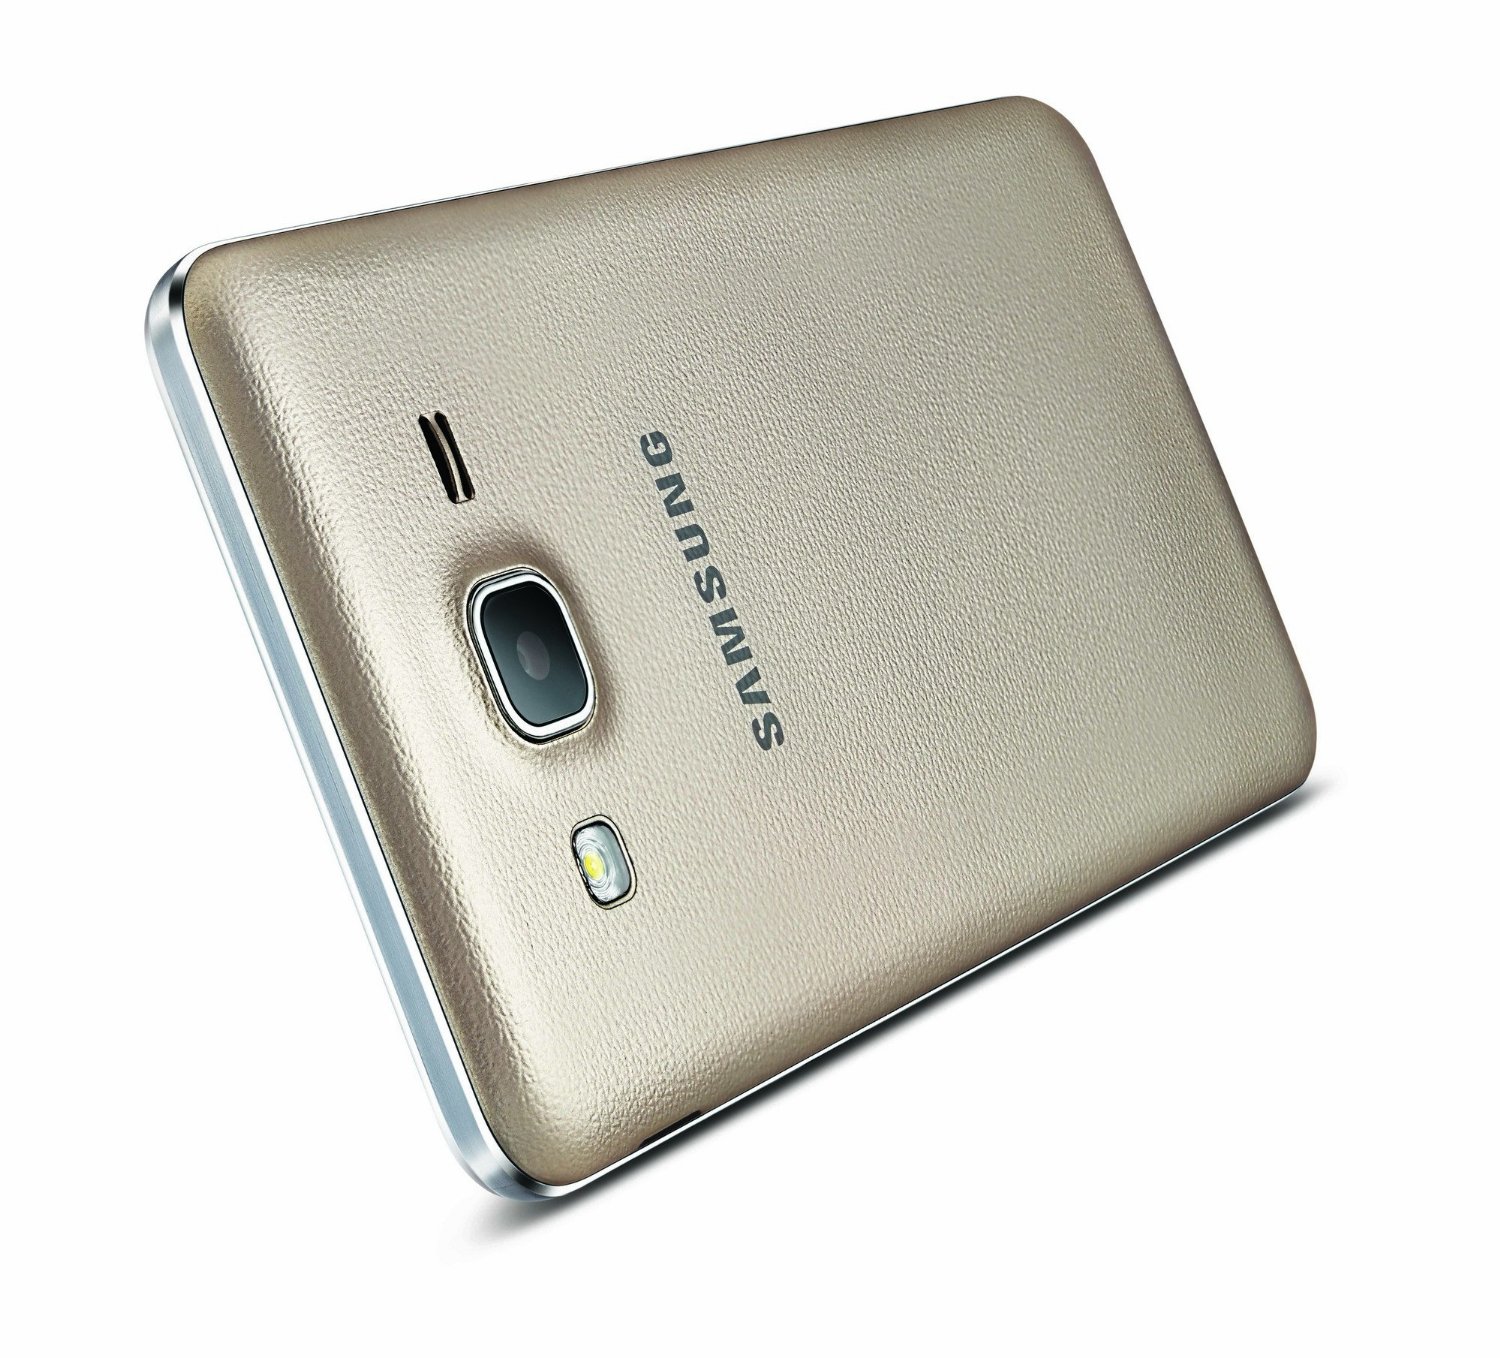 Samsung Galaxy On7 Pro Image - Samsung In 5 Price Gold , HD Wallpaper & Backgrounds